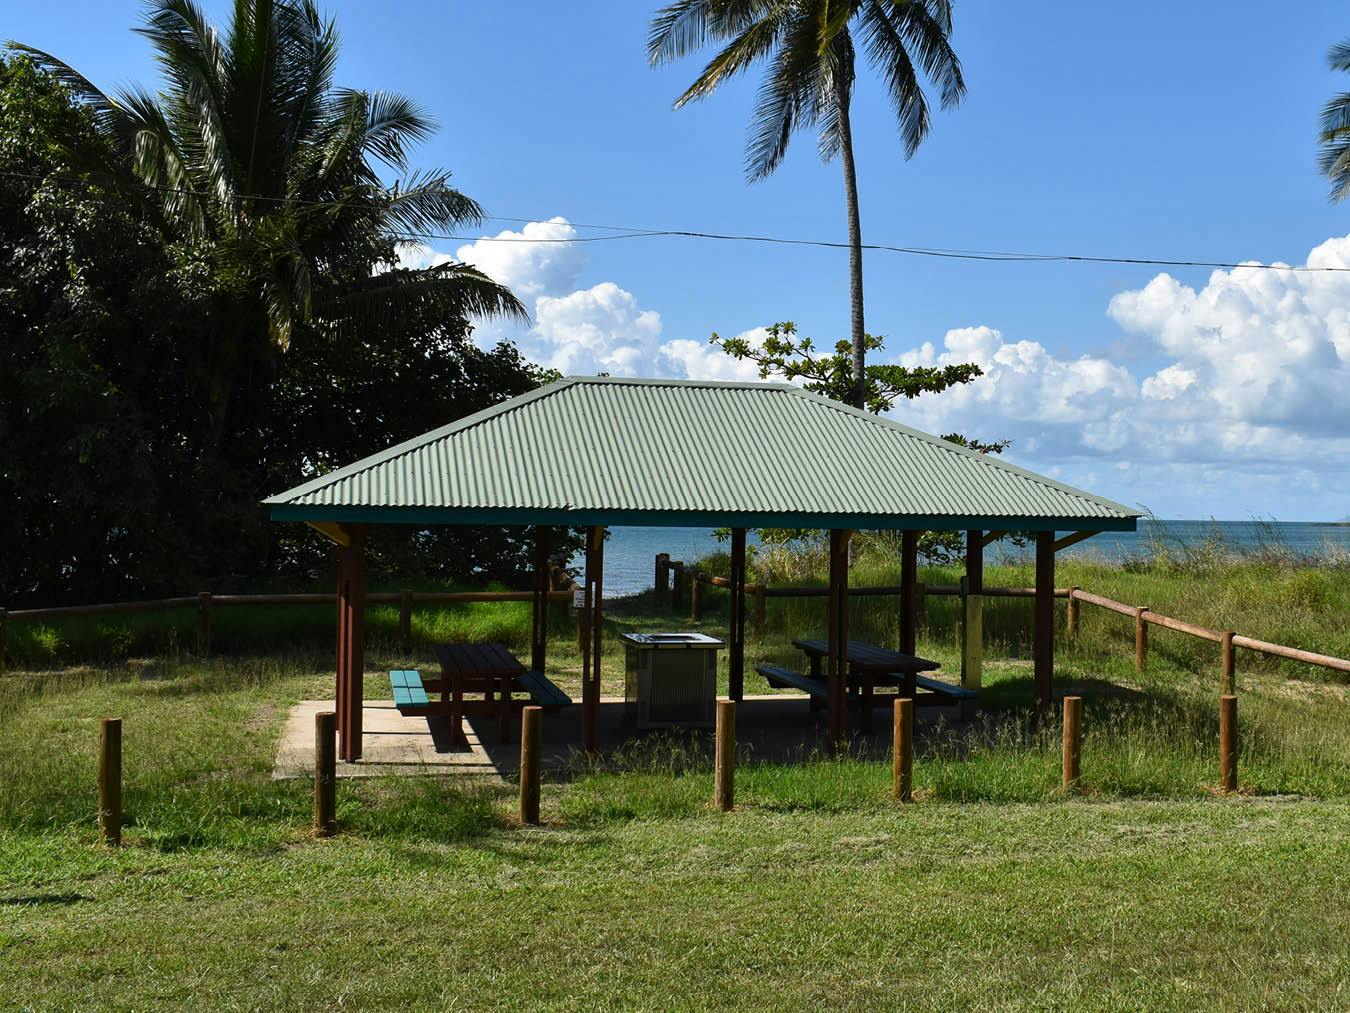 This view is from directly opposite a shelter on the asphalt track. The shelter includes a double BBQ facilitiy and shades two older-style timber picnic settings. Beach access is located directly behind the shelter.